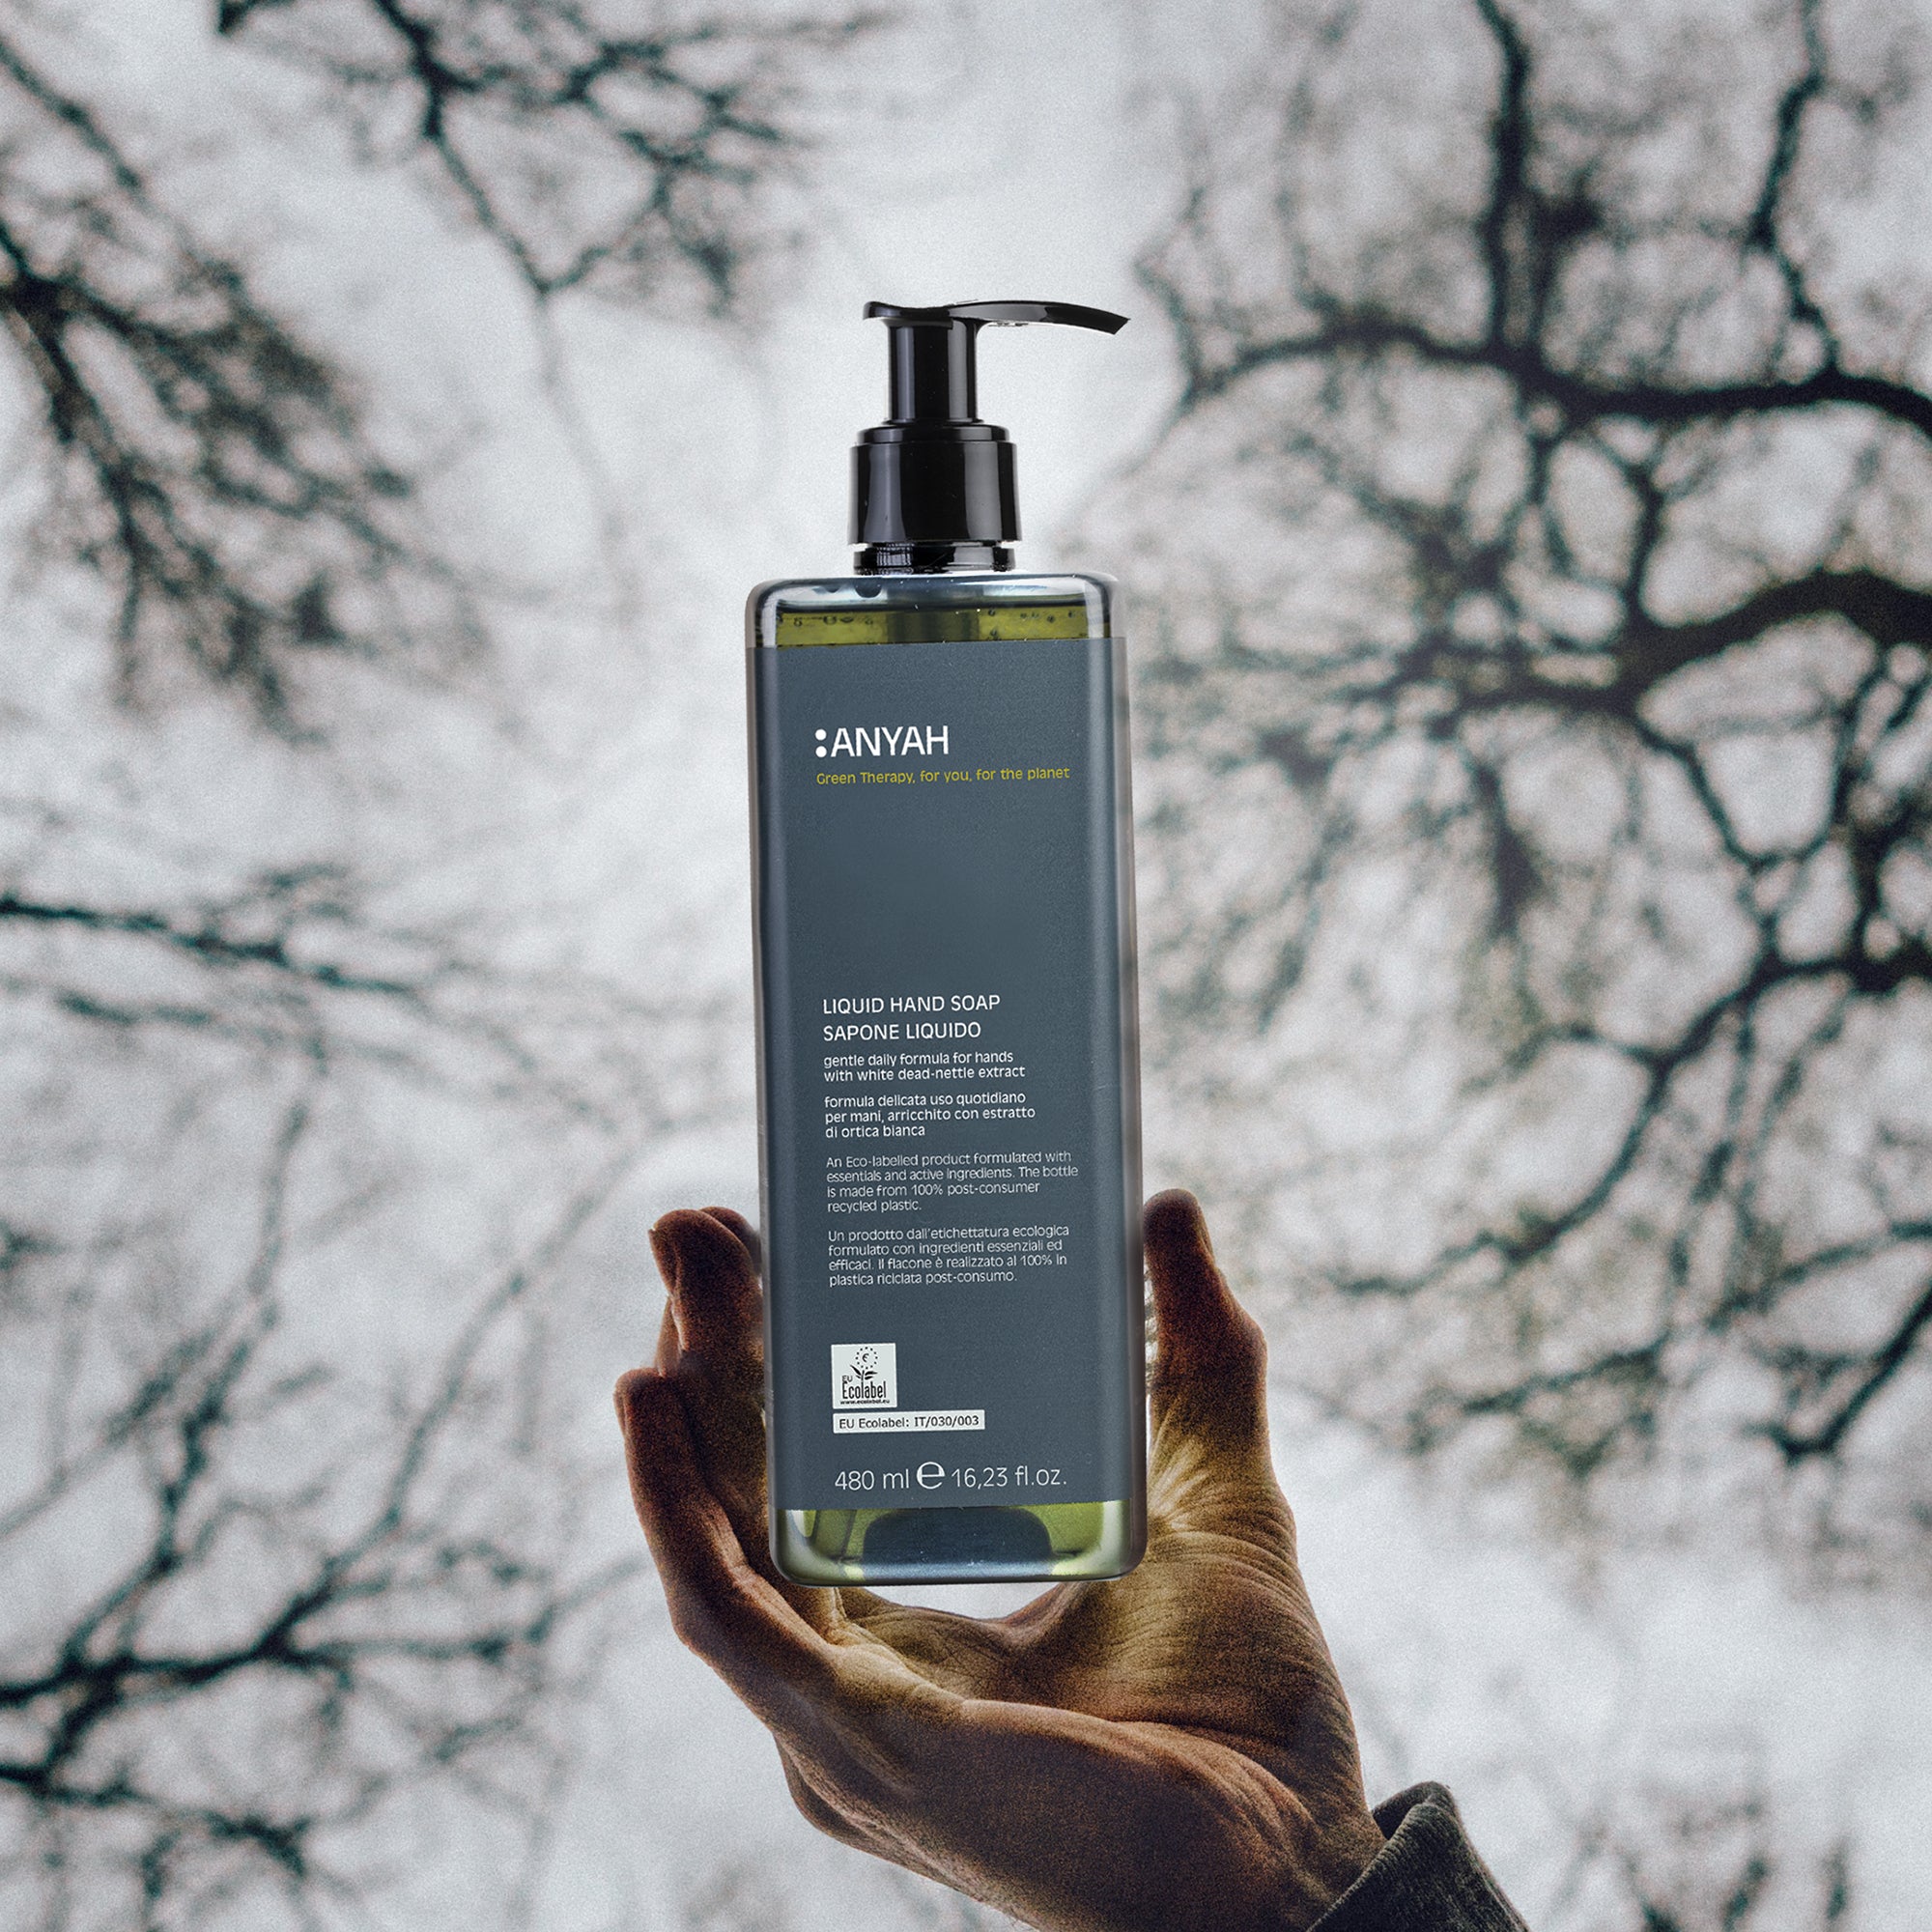 Anyah Liquid Hand Soap Ecolabel Certified ambient trees